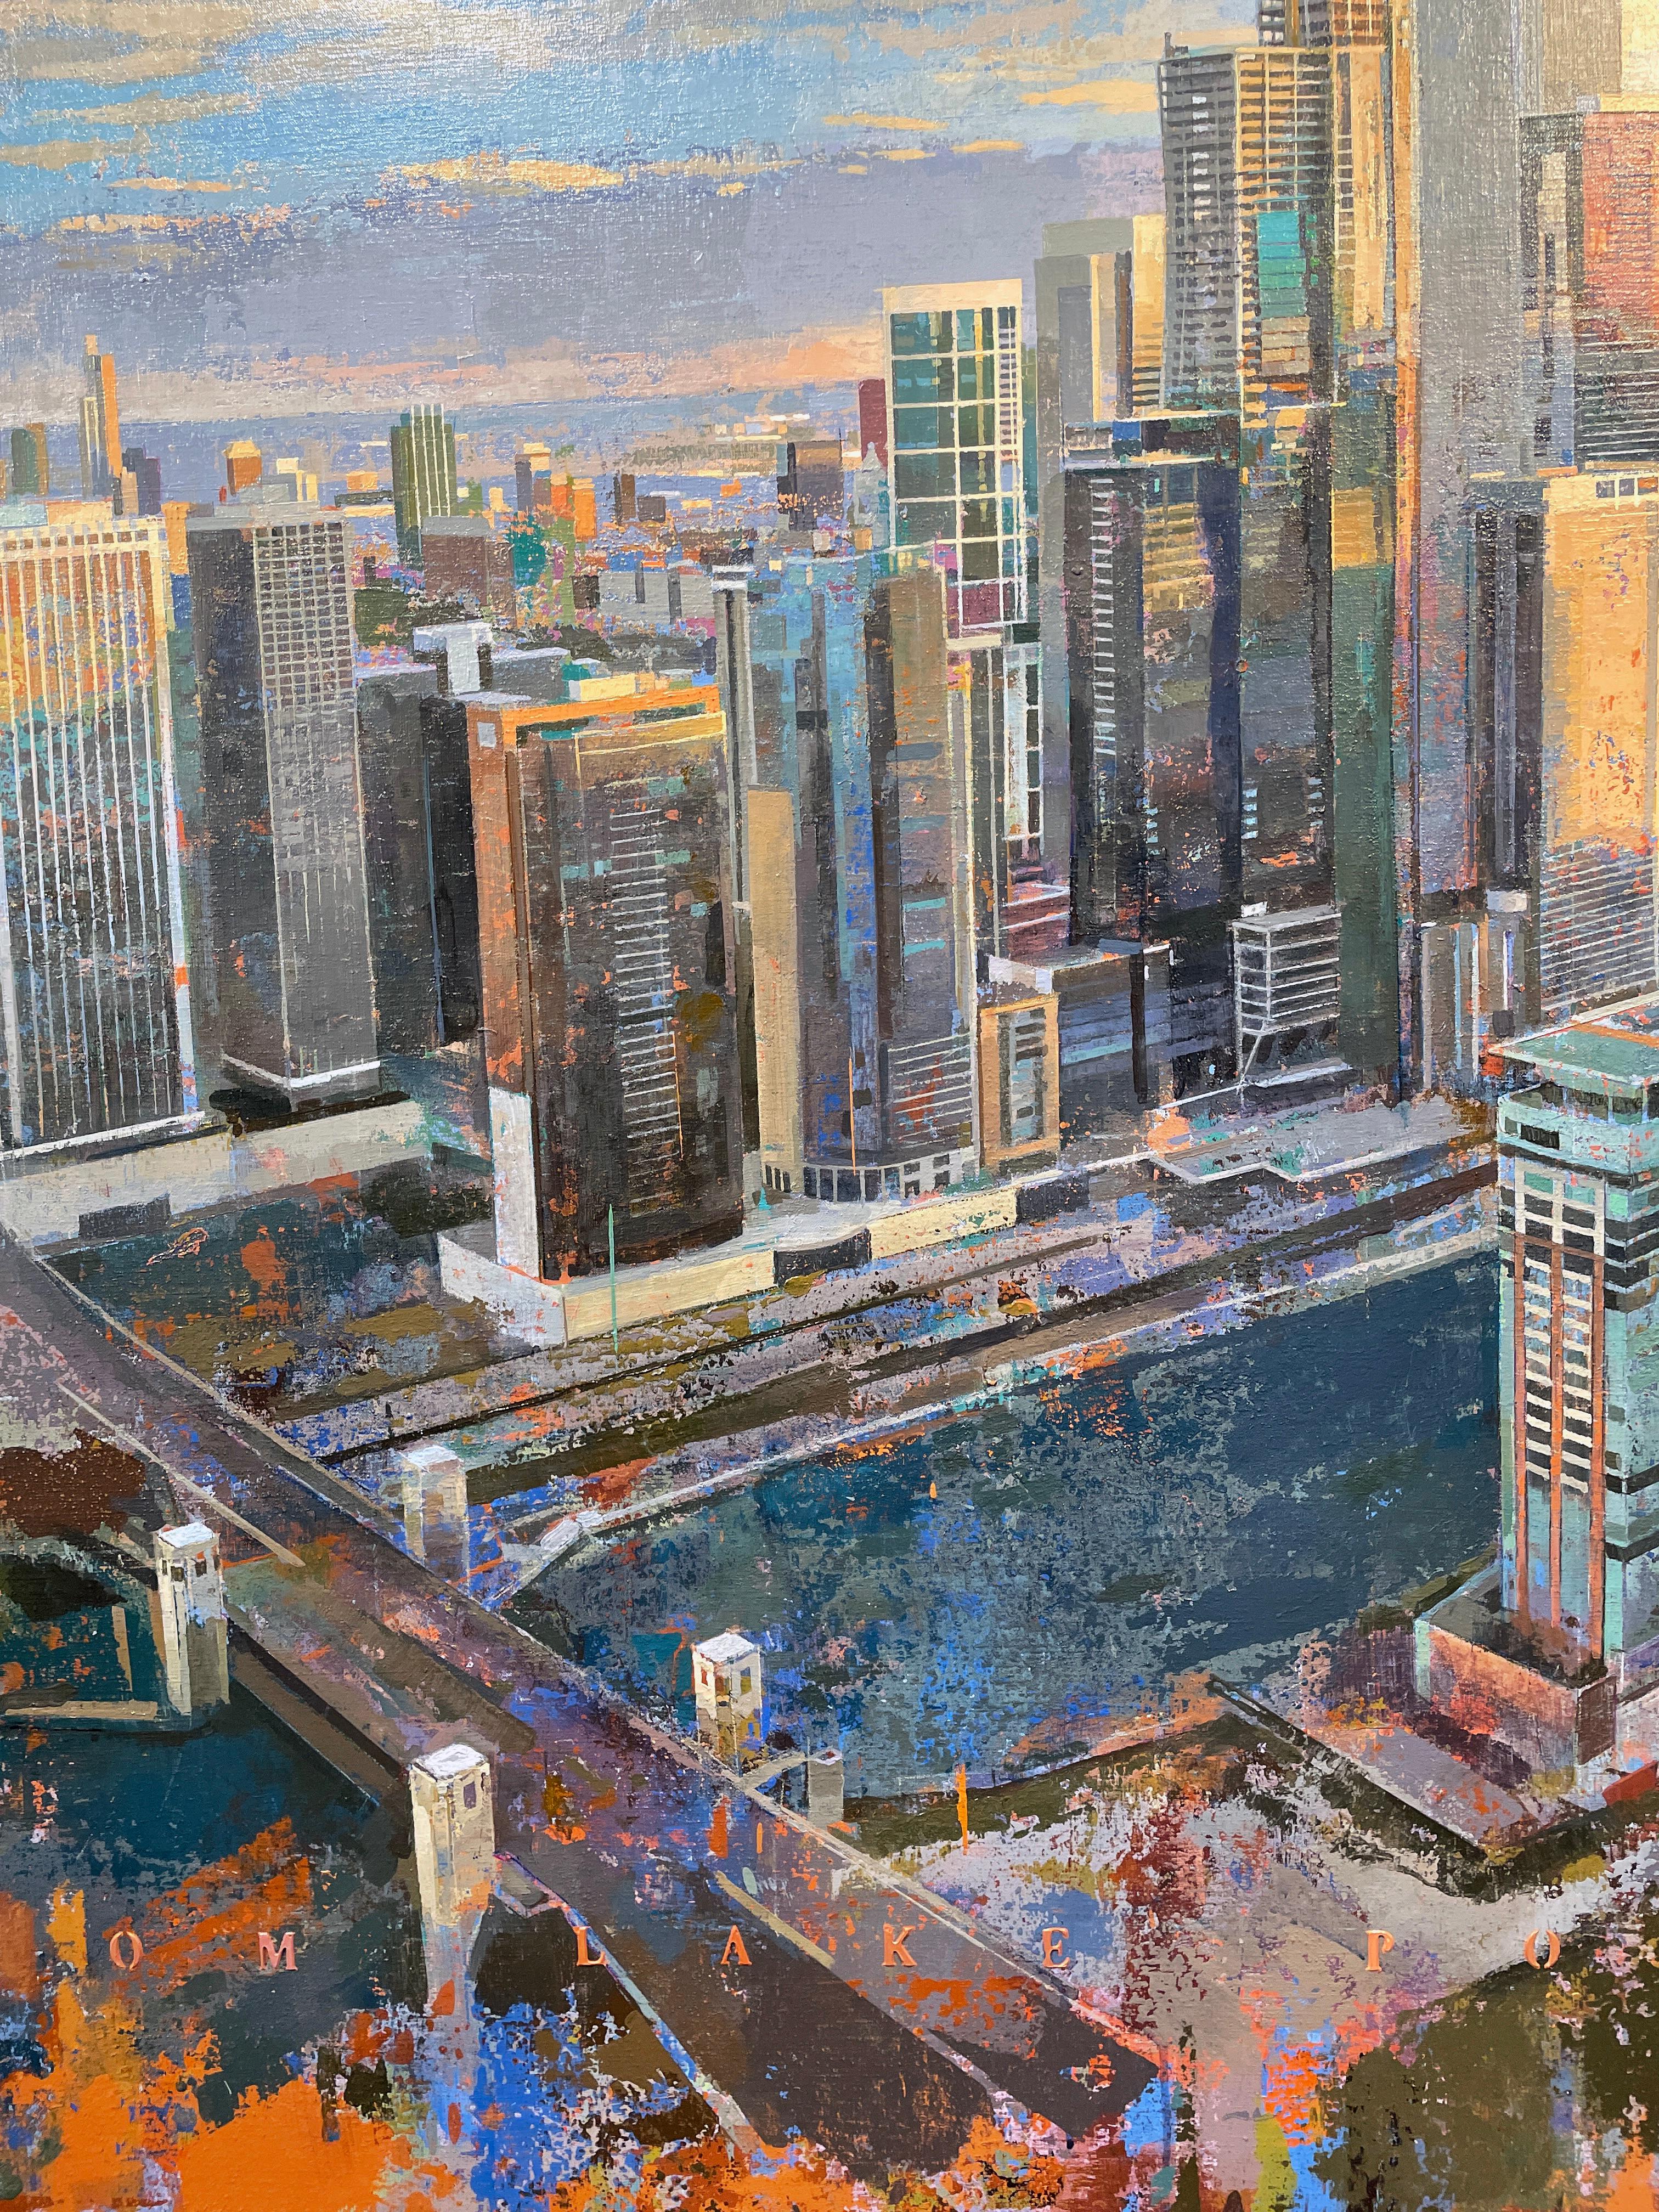 American City, Abstracted Landscape of Chicago Skyline, Original Acrylic  - Gray Landscape Painting by Albert Vidal Moreno